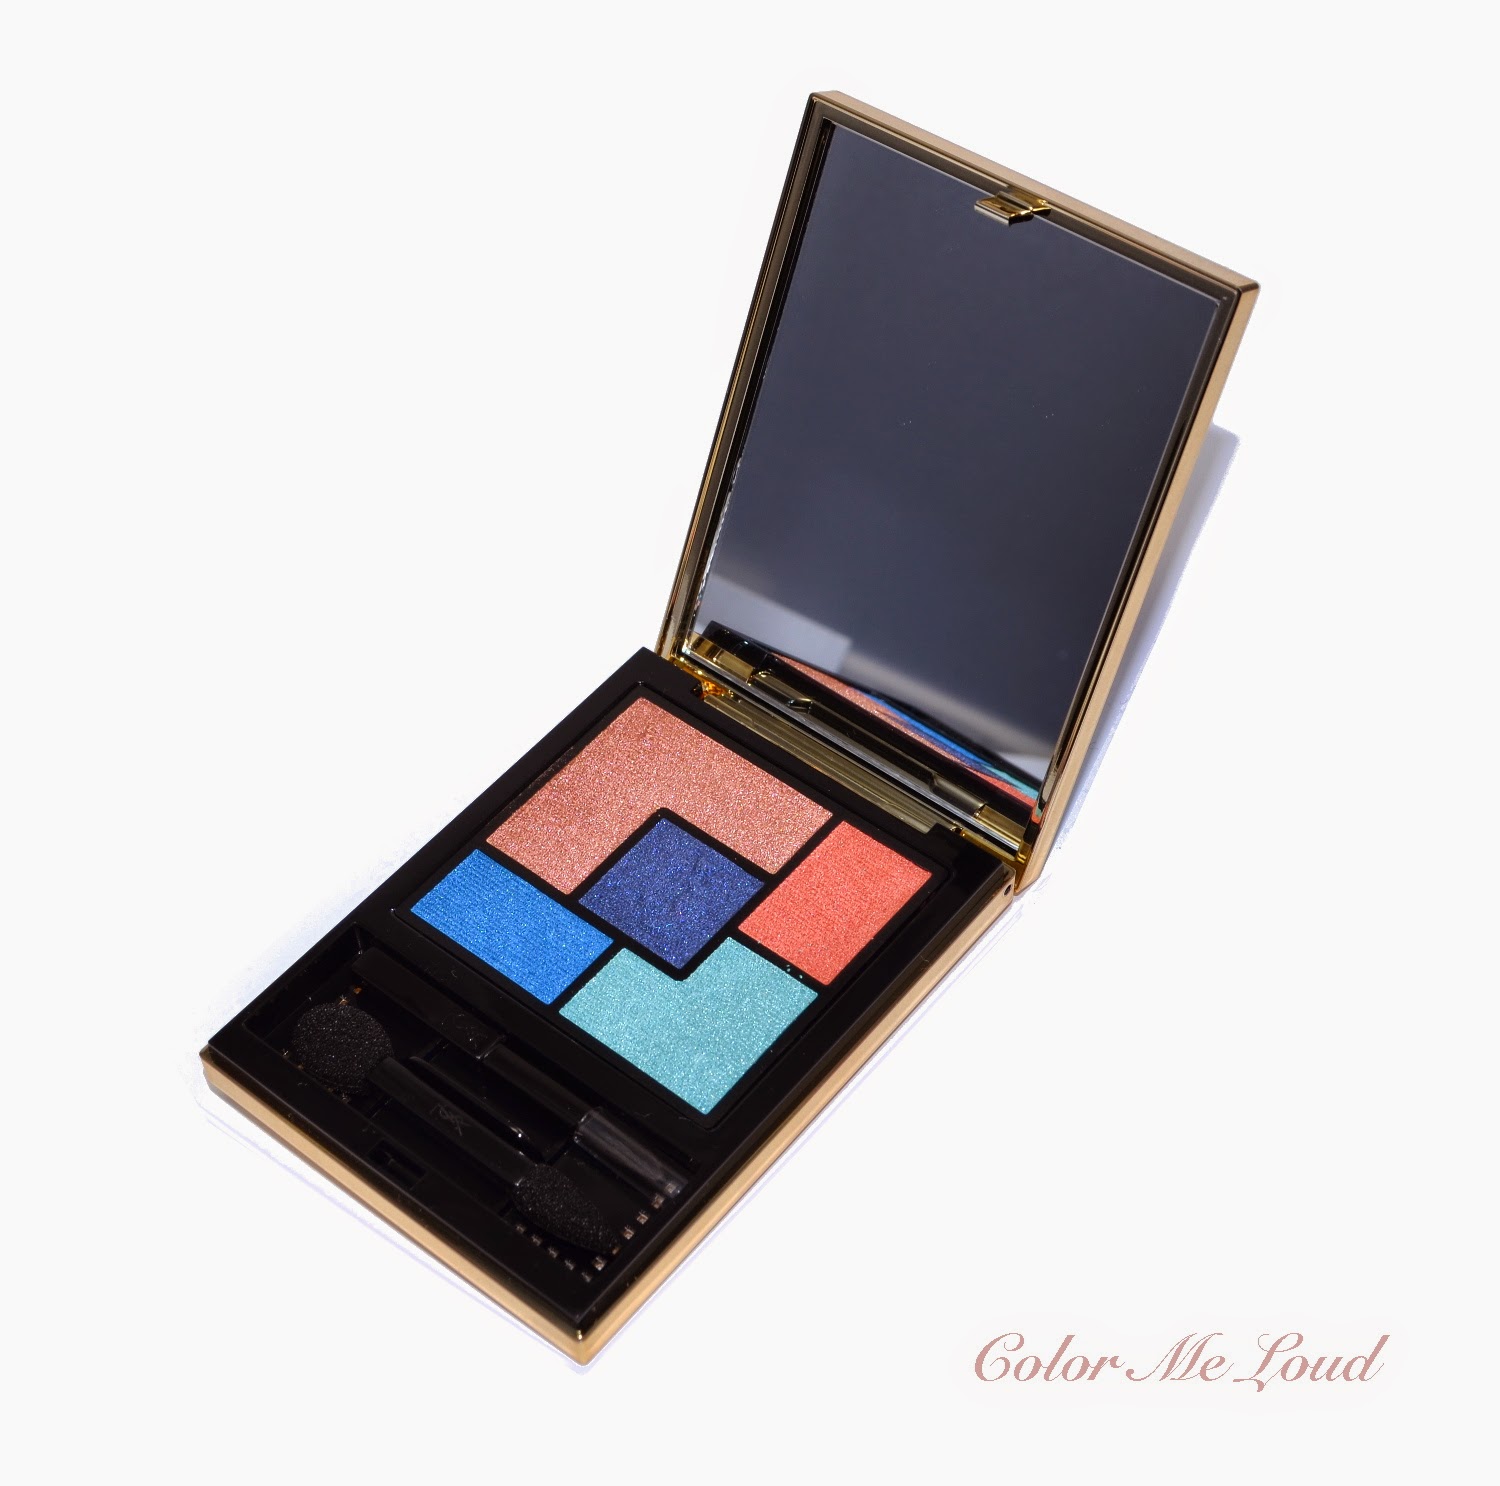 YSL 5 Ombre Eyeshadow Palette in Bleus Lumiere for Summer 2014